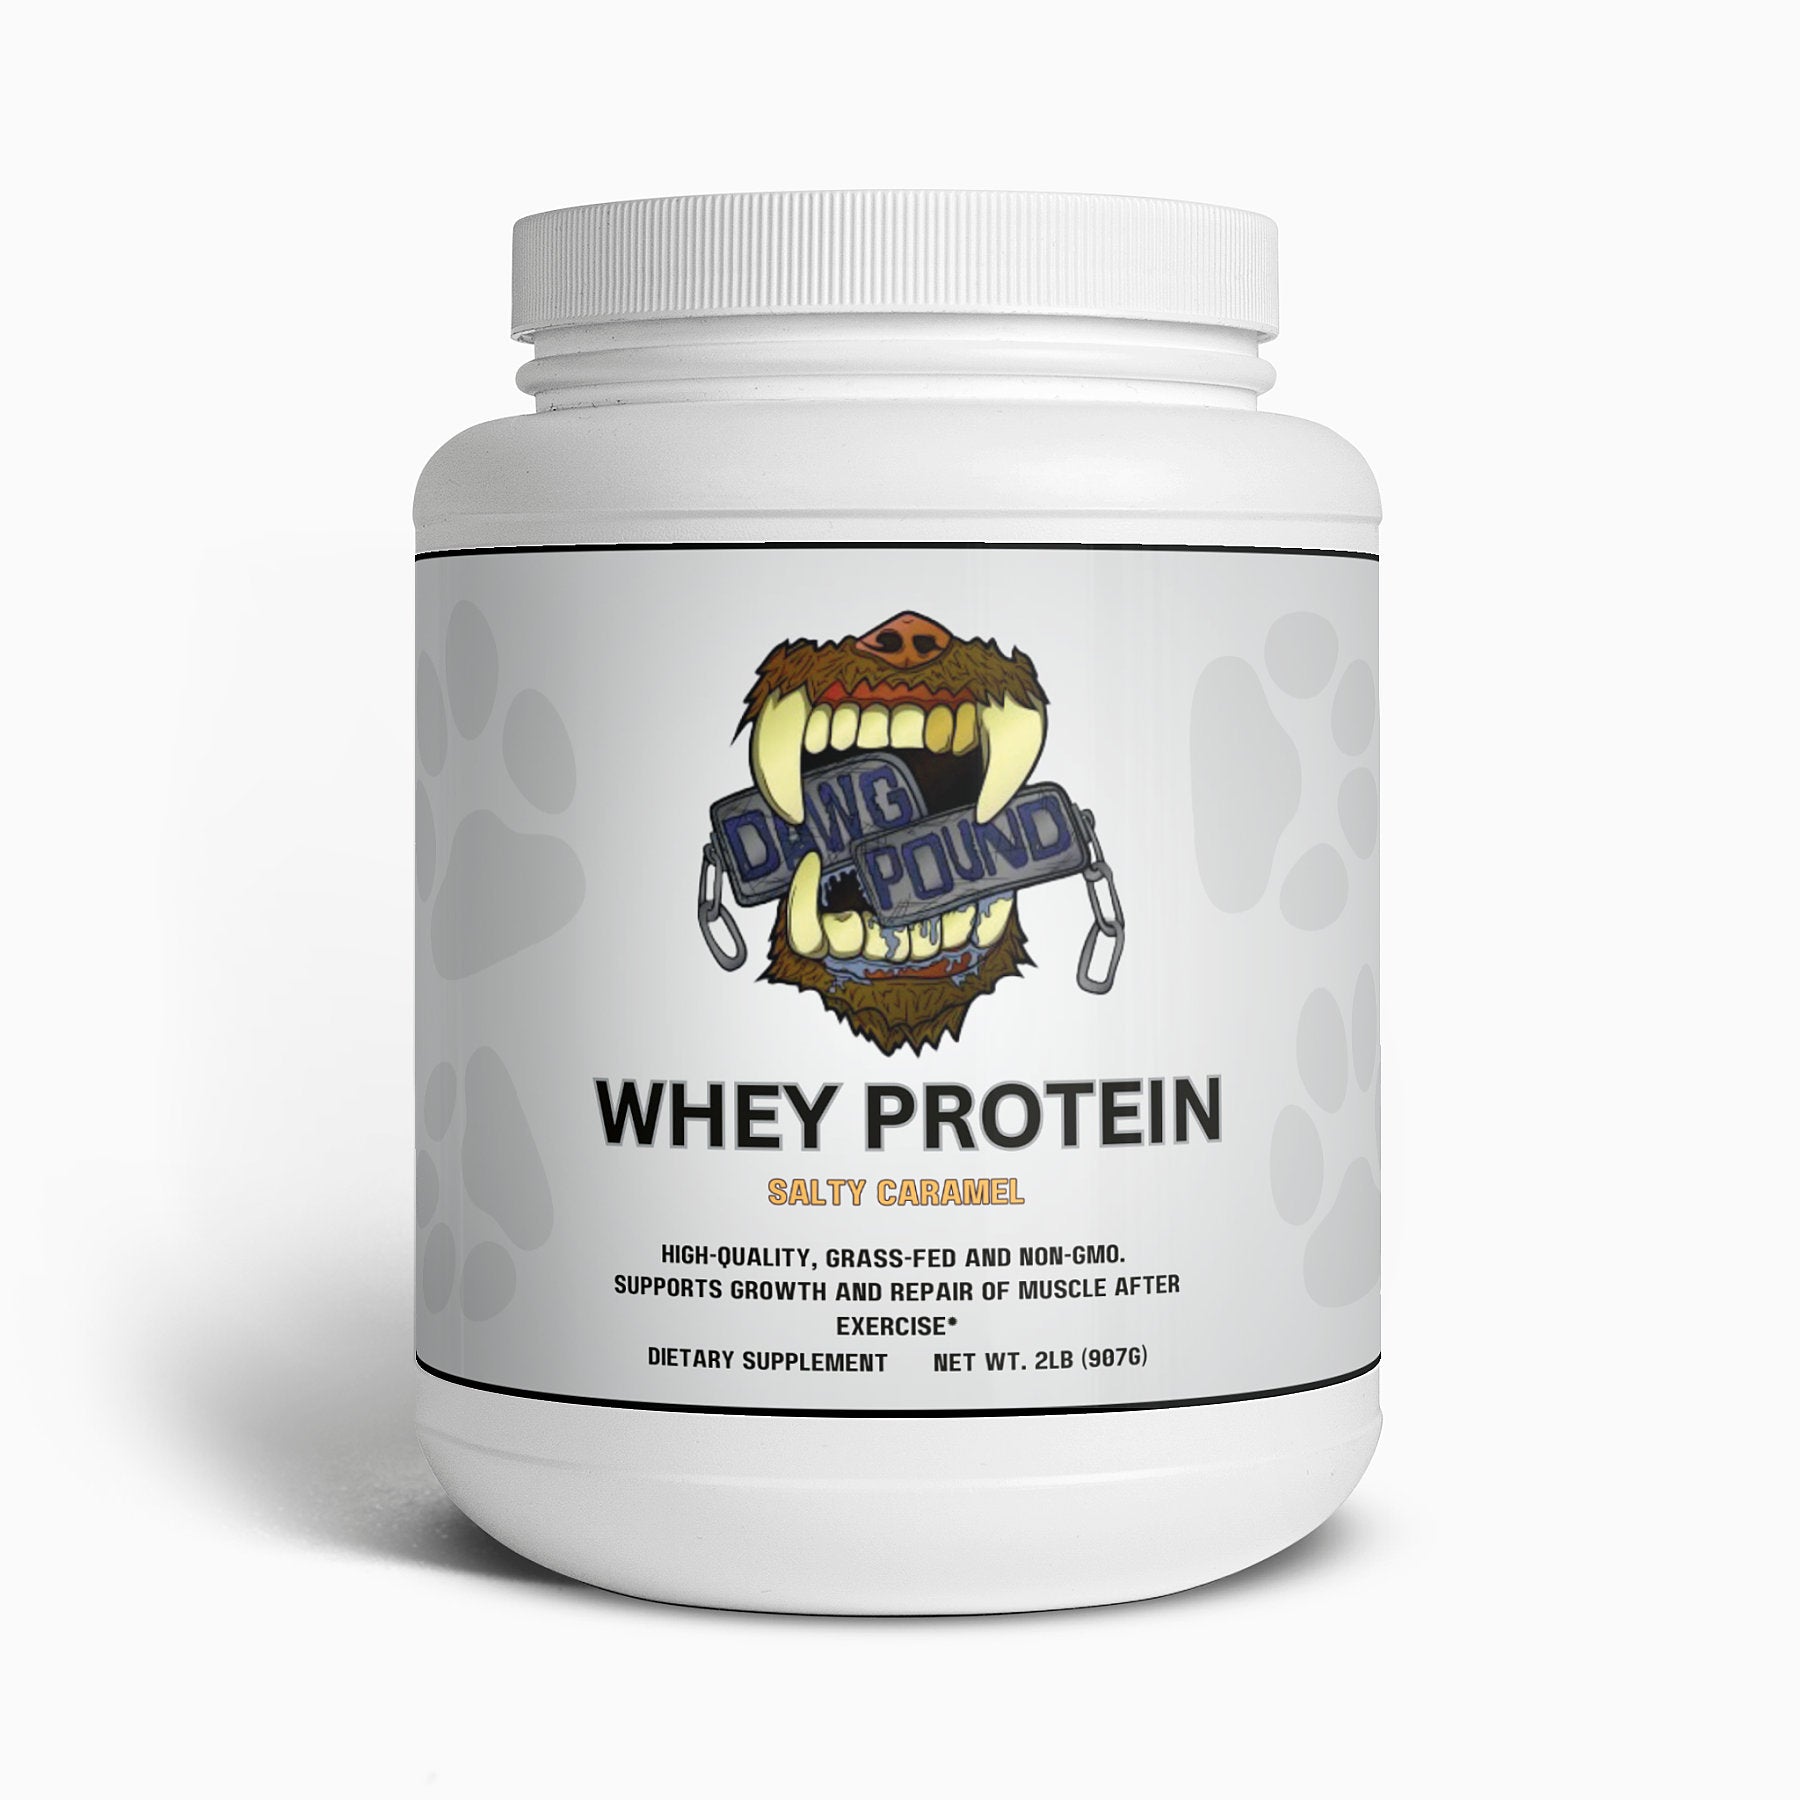 Dawg Pound Grass-Fed Whey Protein - Salty Caramel - Front View 